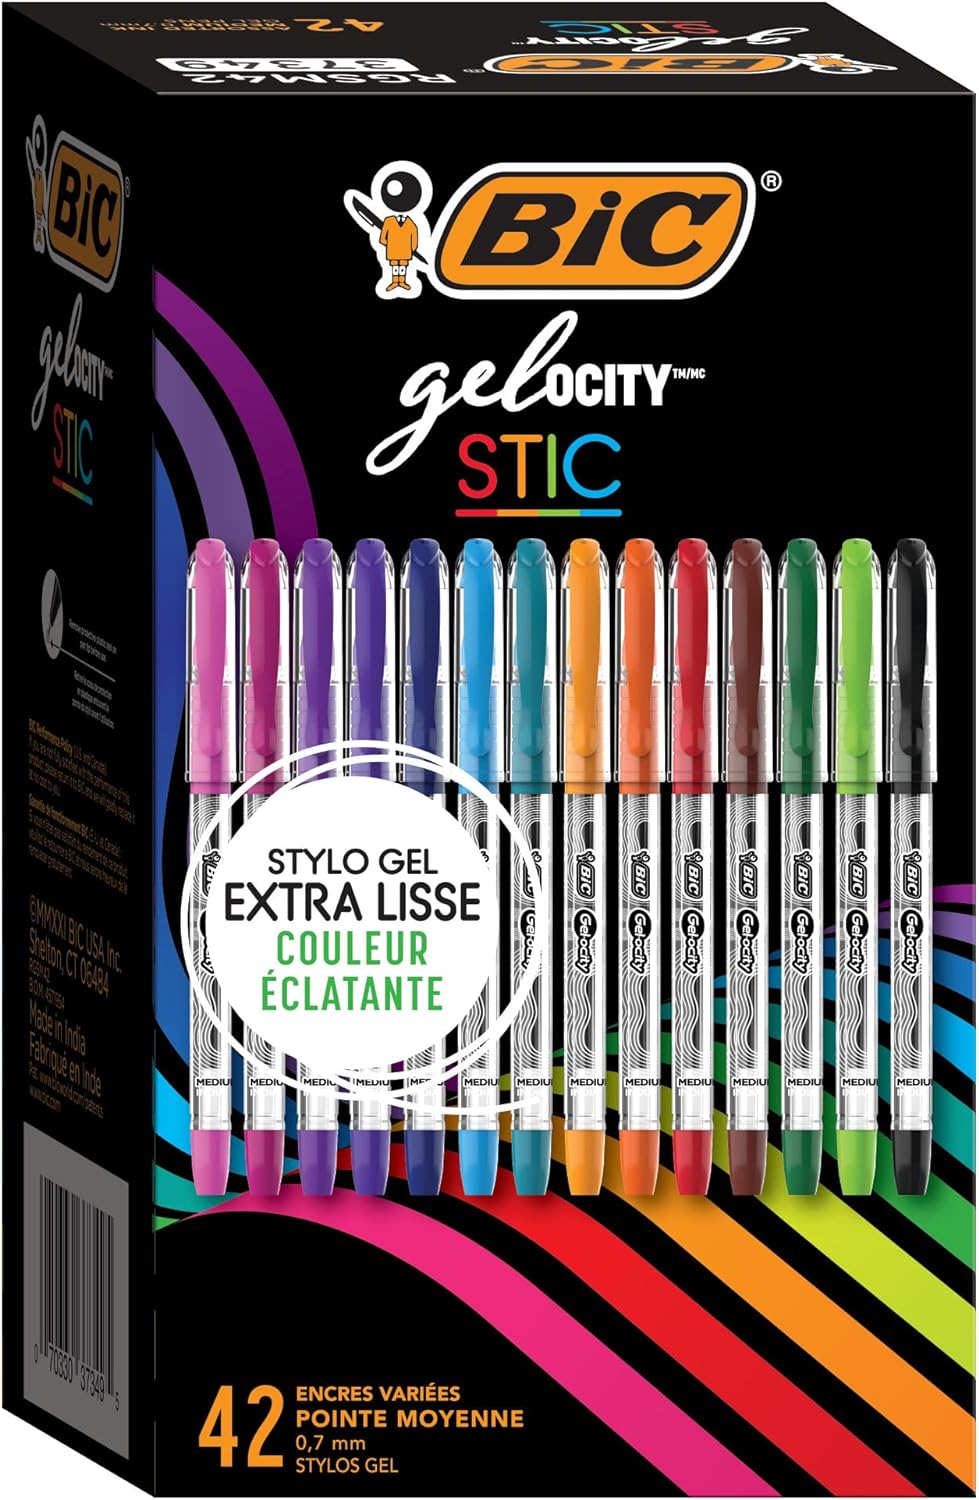 These are fun to use especially on birthday cards and letters. The colors are bright and they write smooth.